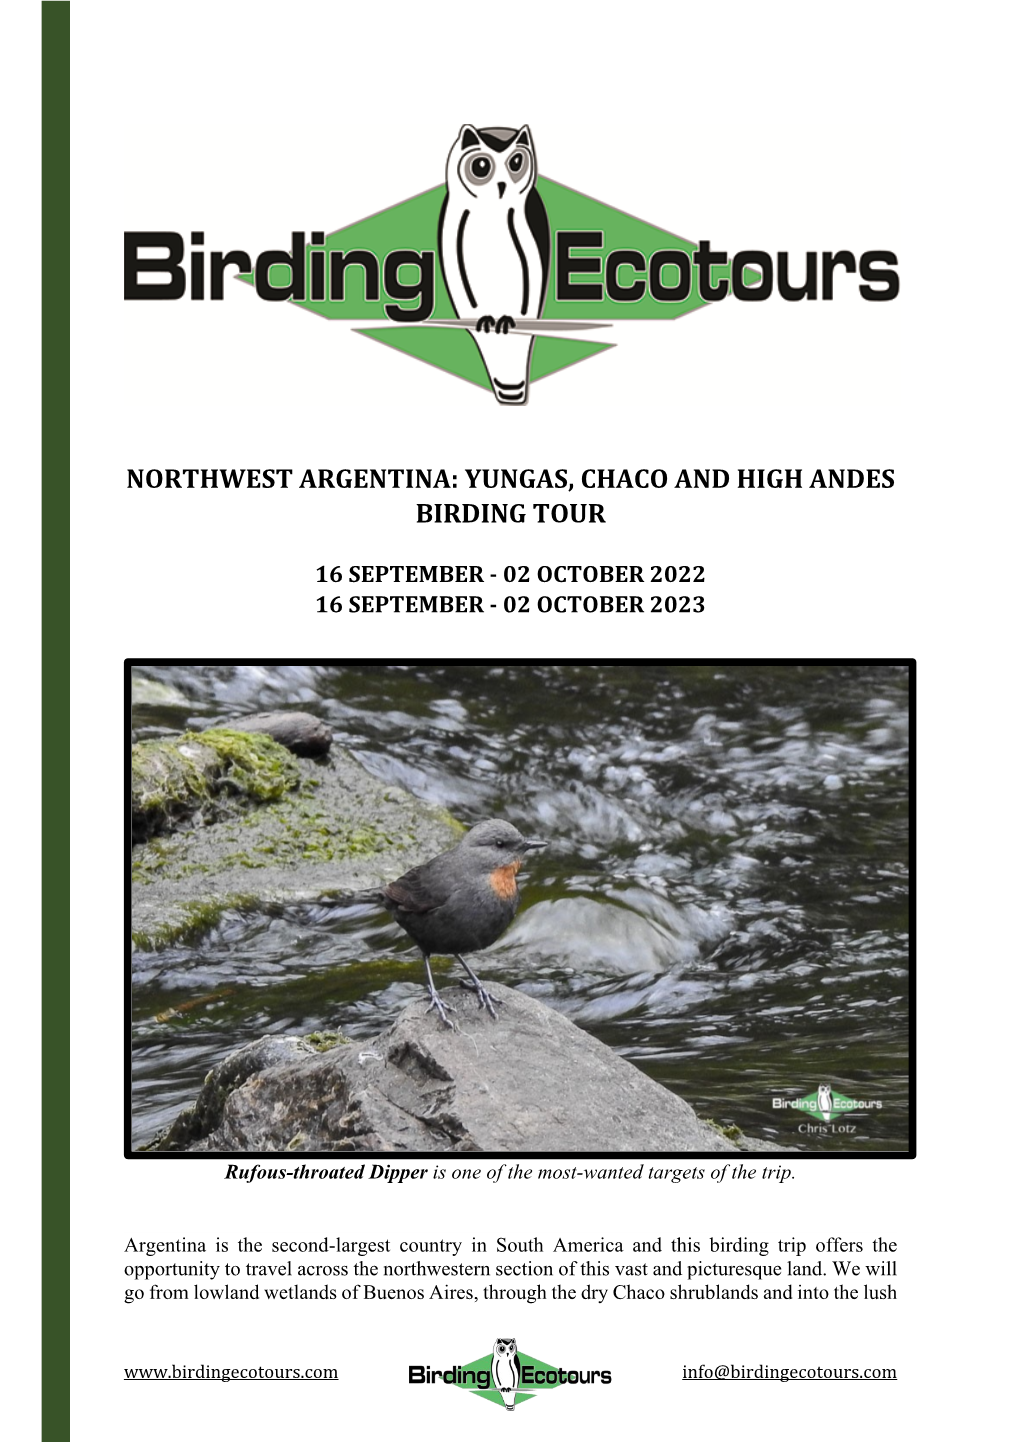 Northwest Argentina: Yungas, Chaco and High Andes Birding Tour